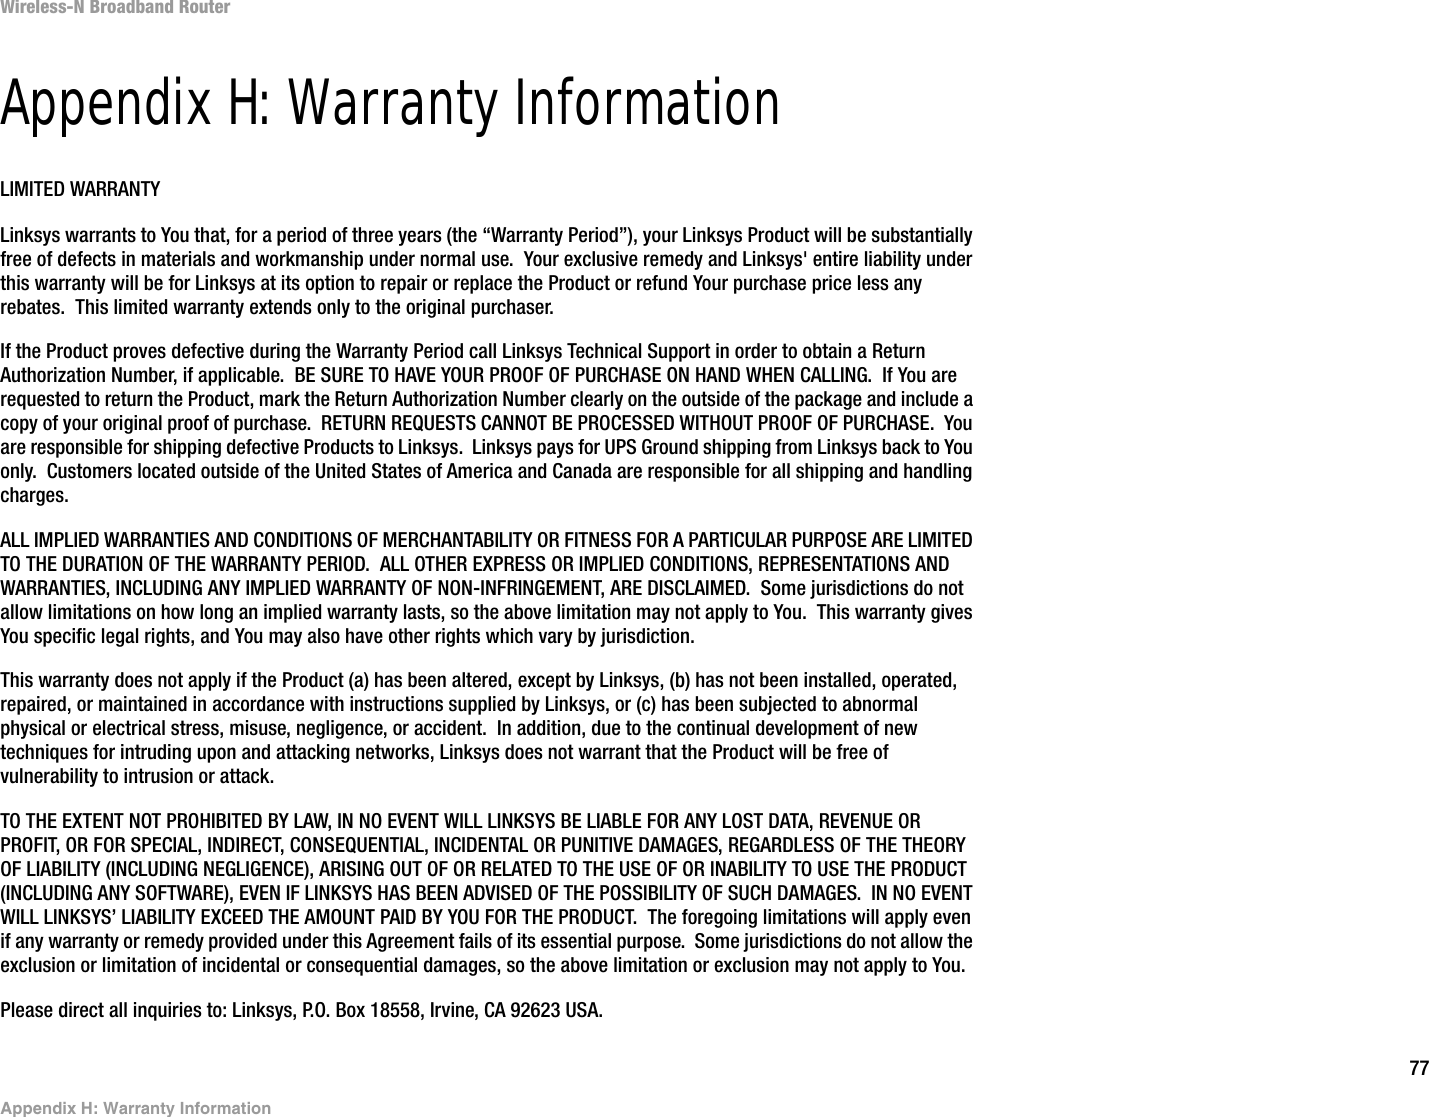 77Appendix H: Warranty InformationWireless-N Broadband RouterAppendix H: Warranty InformationLIMITED WARRANTYLinksys warrants to You that, for a period of three years (the “Warranty Period”), your Linksys Product will be substantially free of defects in materials and workmanship under normal use.  Your exclusive remedy and Linksys&apos; entire liability under this warranty will be for Linksys at its option to repair or replace the Product or refund Your purchase price less any rebates.  This limited warranty extends only to the original purchaser.  If the Product proves defective during the Warranty Period call Linksys Technical Support in order to obtain a Return Authorization Number, if applicable.  BE SURE TO HAVE YOUR PROOF OF PURCHASE ON HAND WHEN CALLING.  If You are requested to return the Product, mark the Return Authorization Number clearly on the outside of the package and include a copy of your original proof of purchase.  RETURN REQUESTS CANNOT BE PROCESSED WITHOUT PROOF OF PURCHASE.  You are responsible for shipping defective Products to Linksys.  Linksys pays for UPS Ground shipping from Linksys back to You only.  Customers located outside of the United States of America and Canada are responsible for all shipping and handling charges. ALL IMPLIED WARRANTIES AND CONDITIONS OF MERCHANTABILITY OR FITNESS FOR A PARTICULAR PURPOSE ARE LIMITED TO THE DURATION OF THE WARRANTY PERIOD.  ALL OTHER EXPRESS OR IMPLIED CONDITIONS, REPRESENTATIONS AND WARRANTIES, INCLUDING ANY IMPLIED WARRANTY OF NON-INFRINGEMENT, ARE DISCLAIMED.  Some jurisdictions do not allow limitations on how long an implied warranty lasts, so the above limitation may not apply to You.  This warranty gives You specific legal rights, and You may also have other rights which vary by jurisdiction.This warranty does not apply if the Product (a) has been altered, except by Linksys, (b) has not been installed, operated, repaired, or maintained in accordance with instructions supplied by Linksys, or (c) has been subjected to abnormal physical or electrical stress, misuse, negligence, or accident.  In addition, due to the continual development of new techniques for intruding upon and attacking networks, Linksys does not warrant that the Product will be free of vulnerability to intrusion or attack.TO THE EXTENT NOT PROHIBITED BY LAW, IN NO EVENT WILL LINKSYS BE LIABLE FOR ANY LOST DATA, REVENUE OR PROFIT, OR FOR SPECIAL, INDIRECT, CONSEQUENTIAL, INCIDENTAL OR PUNITIVE DAMAGES, REGARDLESS OF THE THEORY OF LIABILITY (INCLUDING NEGLIGENCE), ARISING OUT OF OR RELATED TO THE USE OF OR INABILITY TO USE THE PRODUCT (INCLUDING ANY SOFTWARE), EVEN IF LINKSYS HAS BEEN ADVISED OF THE POSSIBILITY OF SUCH DAMAGES.  IN NO EVENT WILL LINKSYS’ LIABILITY EXCEED THE AMOUNT PAID BY YOU FOR THE PRODUCT.  The foregoing limitations will apply even if any warranty or remedy provided under this Agreement fails of its essential purpose.  Some jurisdictions do not allow the exclusion or limitation of incidental or consequential damages, so the above limitation or exclusion may not apply to You.Please direct all inquiries to: Linksys, P.O. Box 18558, Irvine, CA 92623 USA.